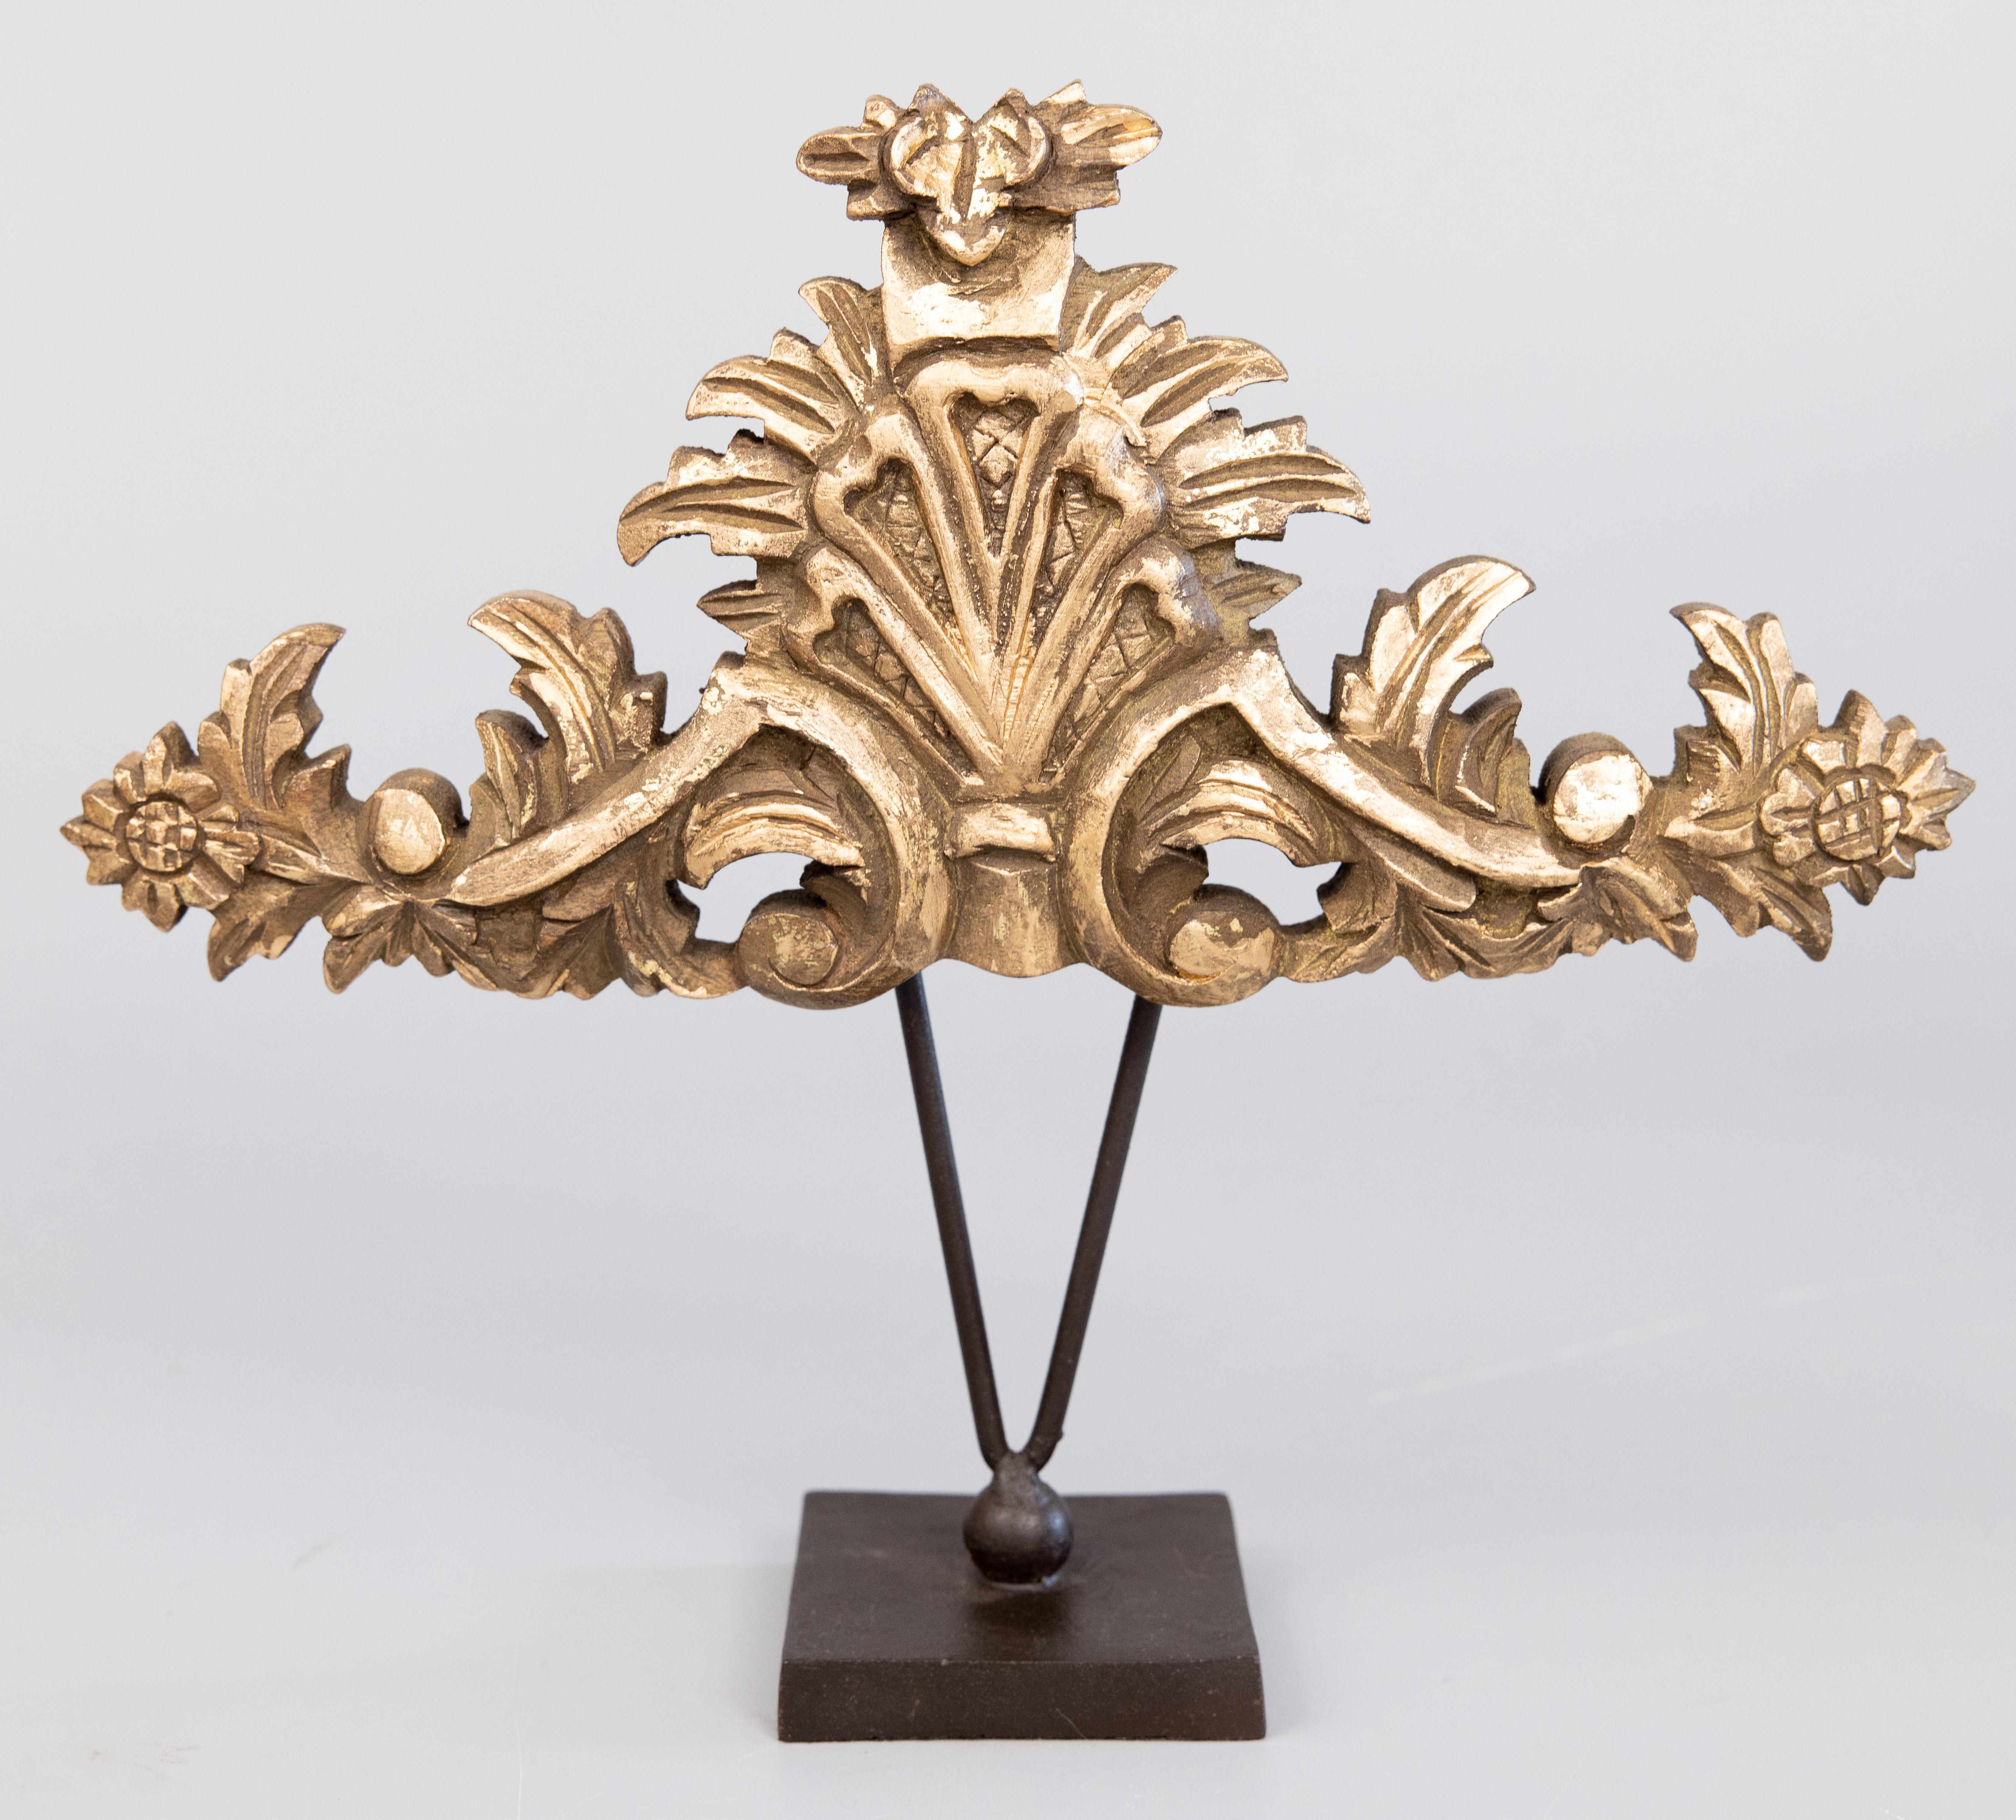 A lovely set of Mid-Century Italian giltwood fragments / architectural elements on metal stands. These stunning fragments have a lovely gilt patina and would be perfect on a bookshelf or for display in any room. One fragment is 14